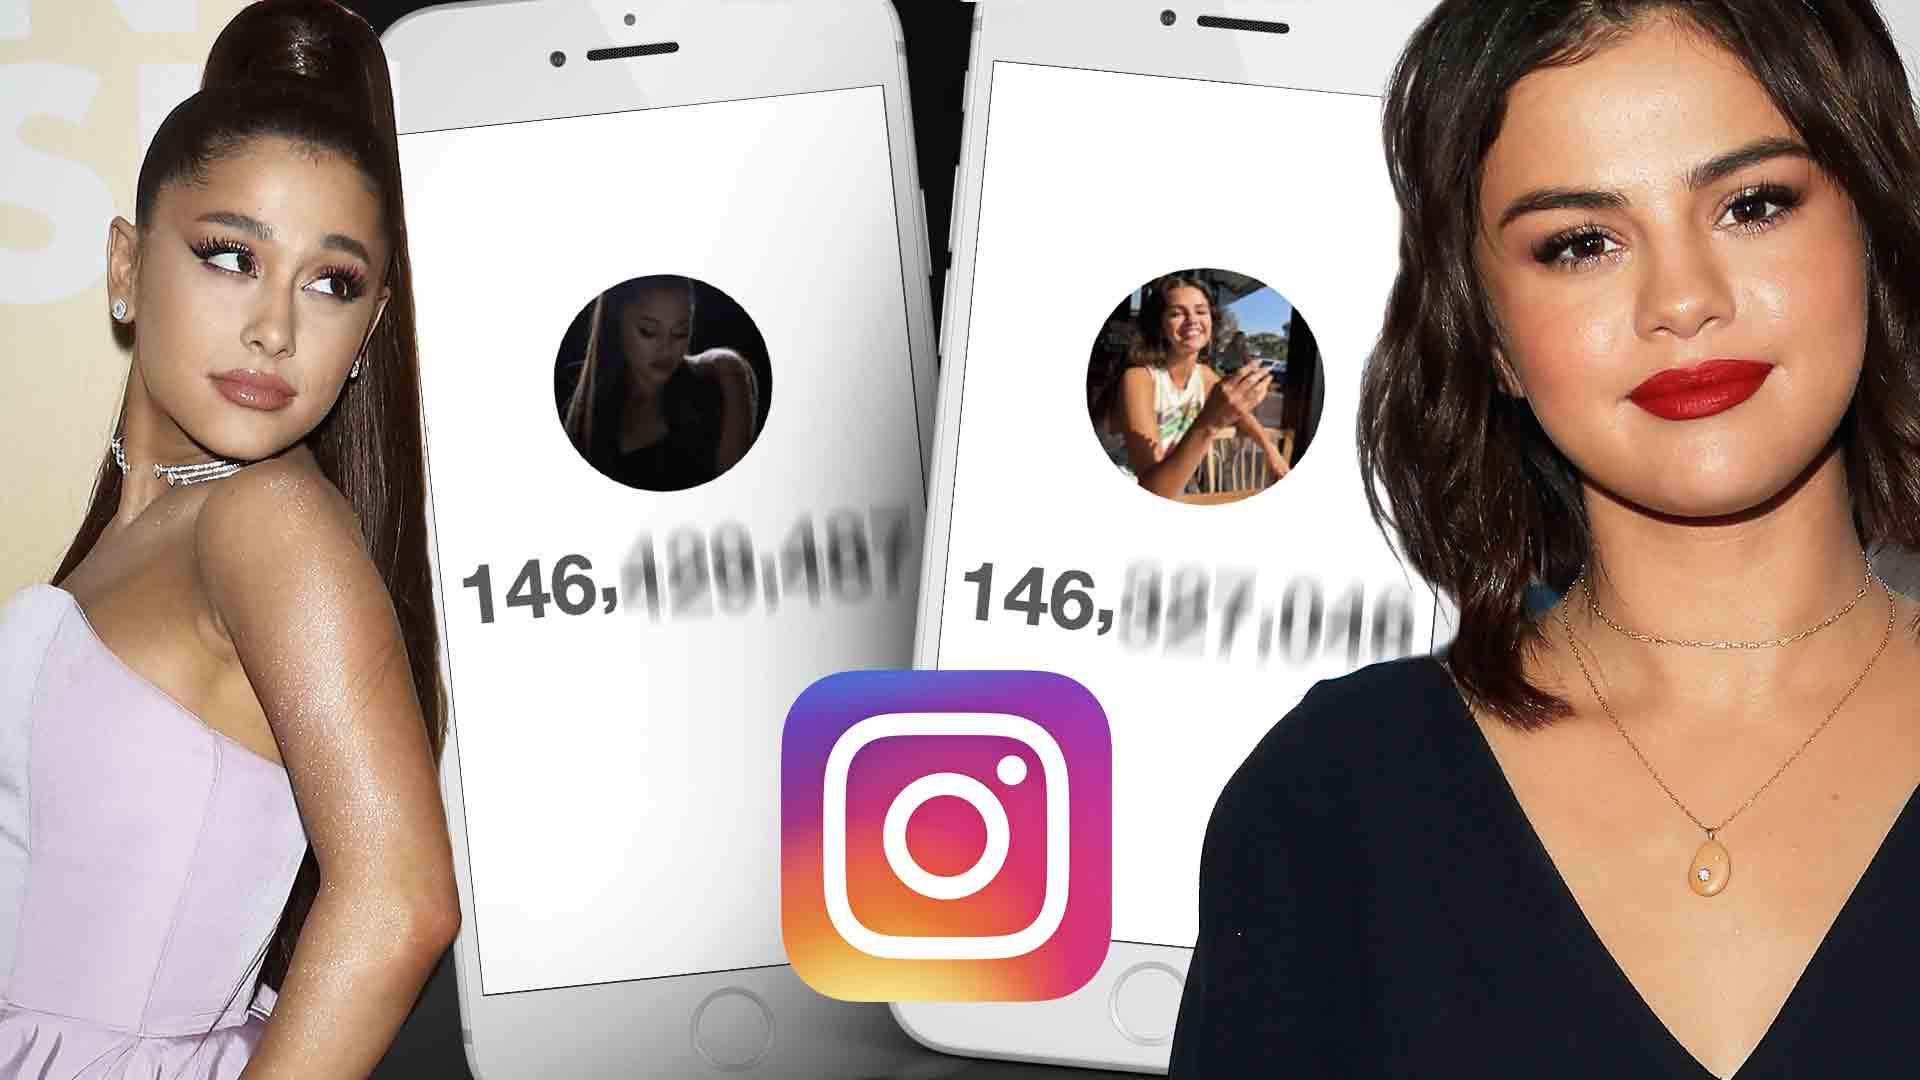 Ariana Grande & Selena Gomez Neck and Neck For Most Followed Woman on Instagram